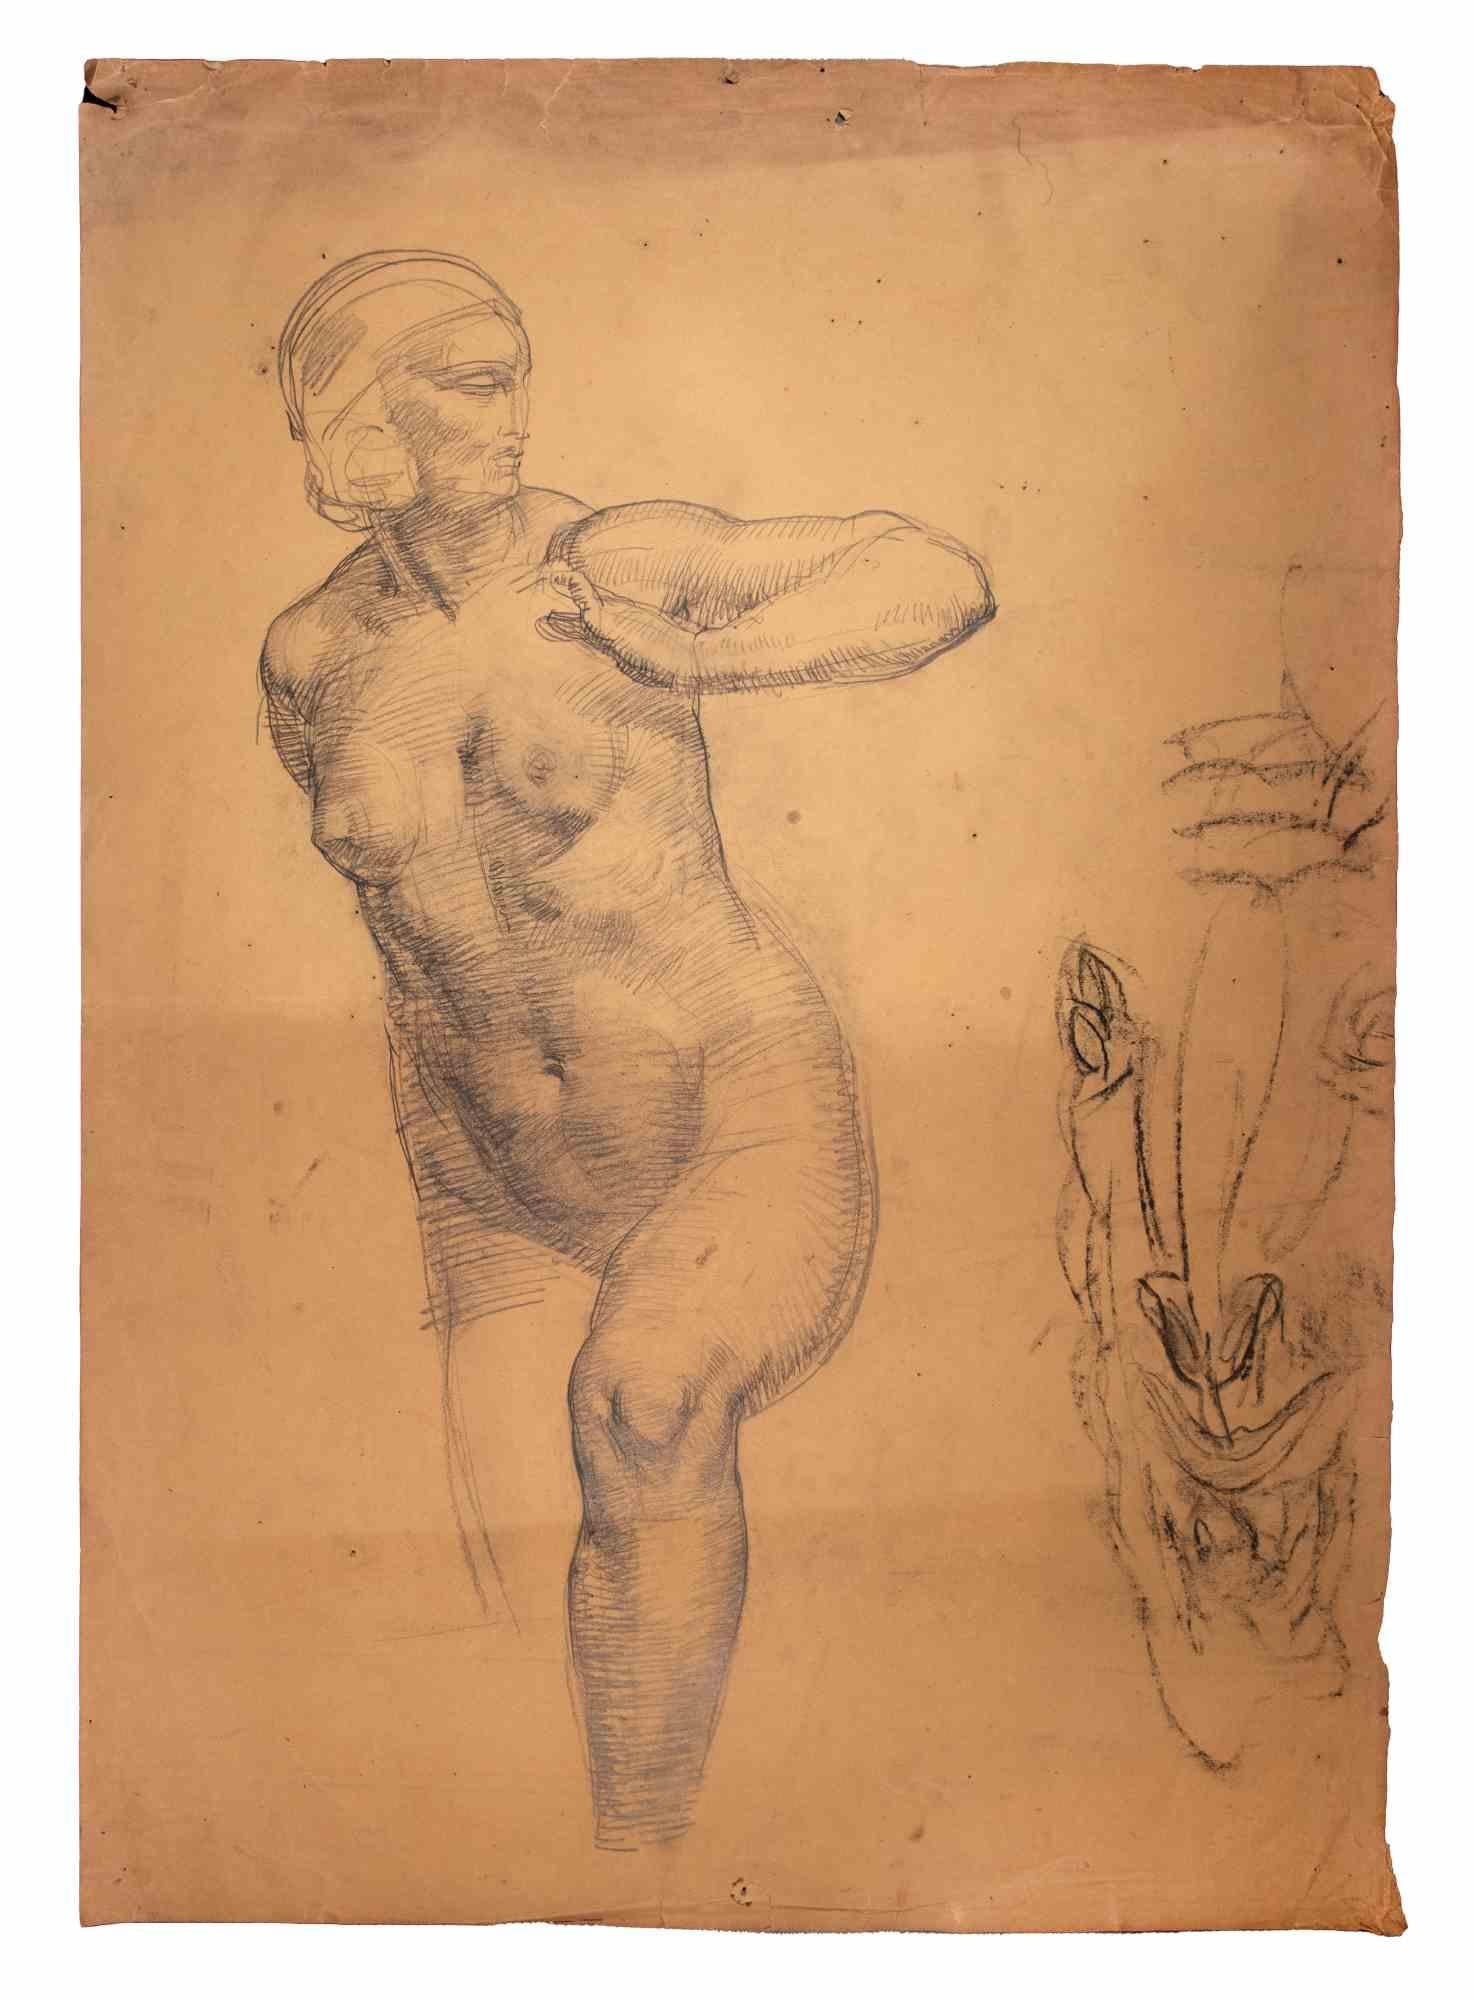 Unknown Nude - Study of Female Figure - Original Drawing - Mid-20th Century